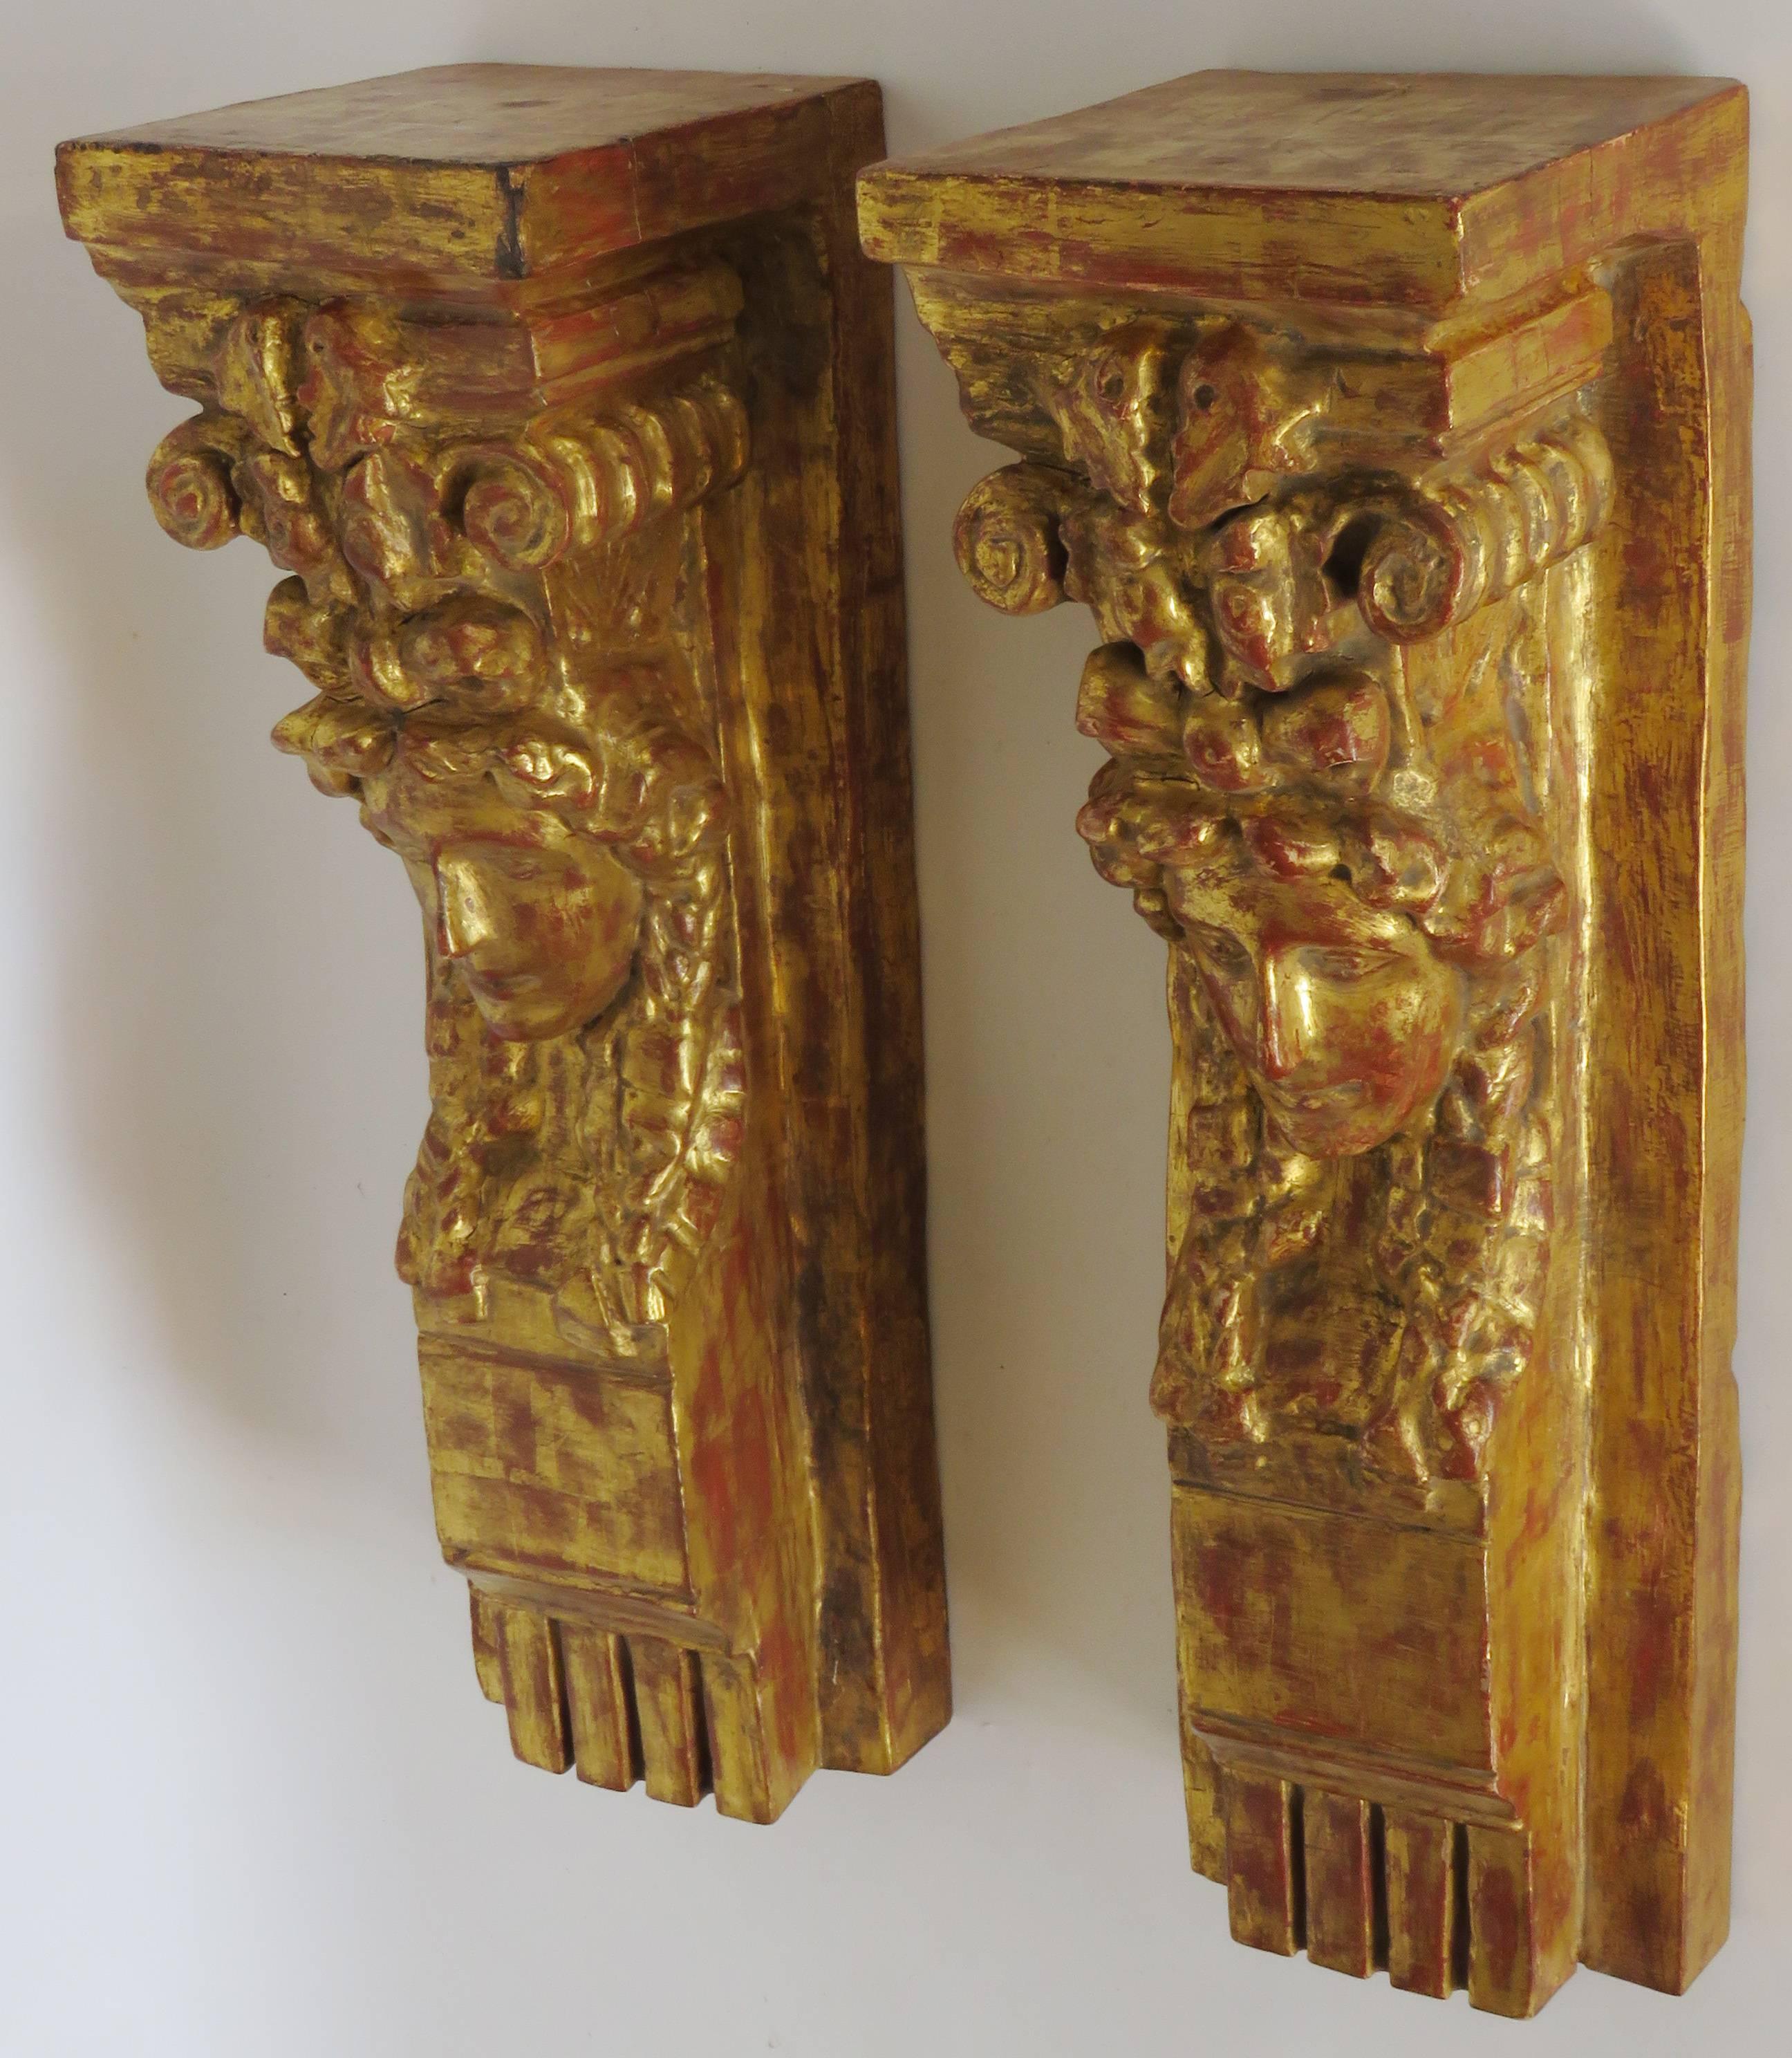 Pair of attractive, slender rectangular giltwood brackets with female face and foliate carving topped by deep molded plinth. Suggestion: Place a custom-made double glass top to make a wall console.